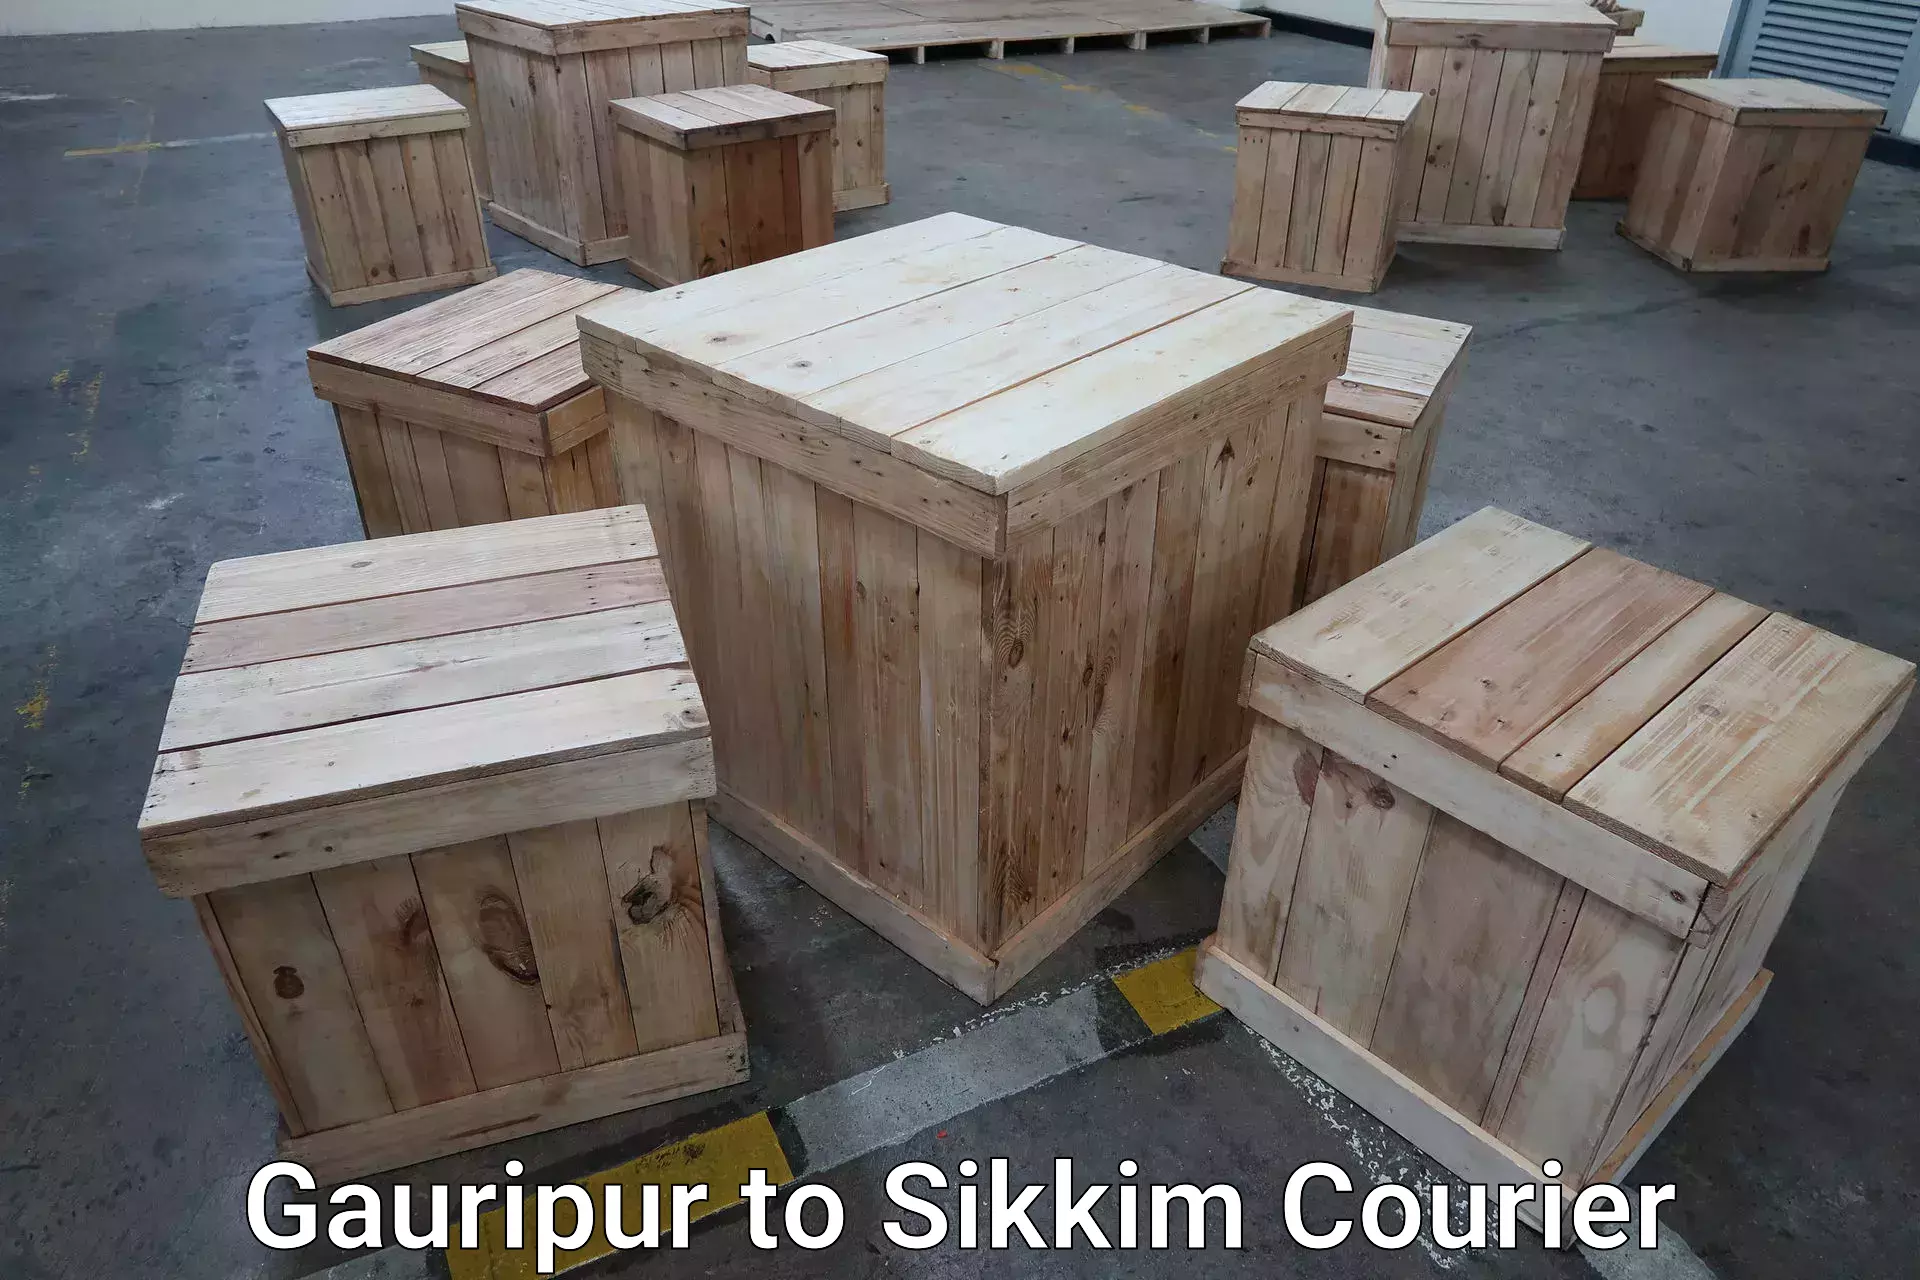 Luggage delivery network Gauripur to Sikkim